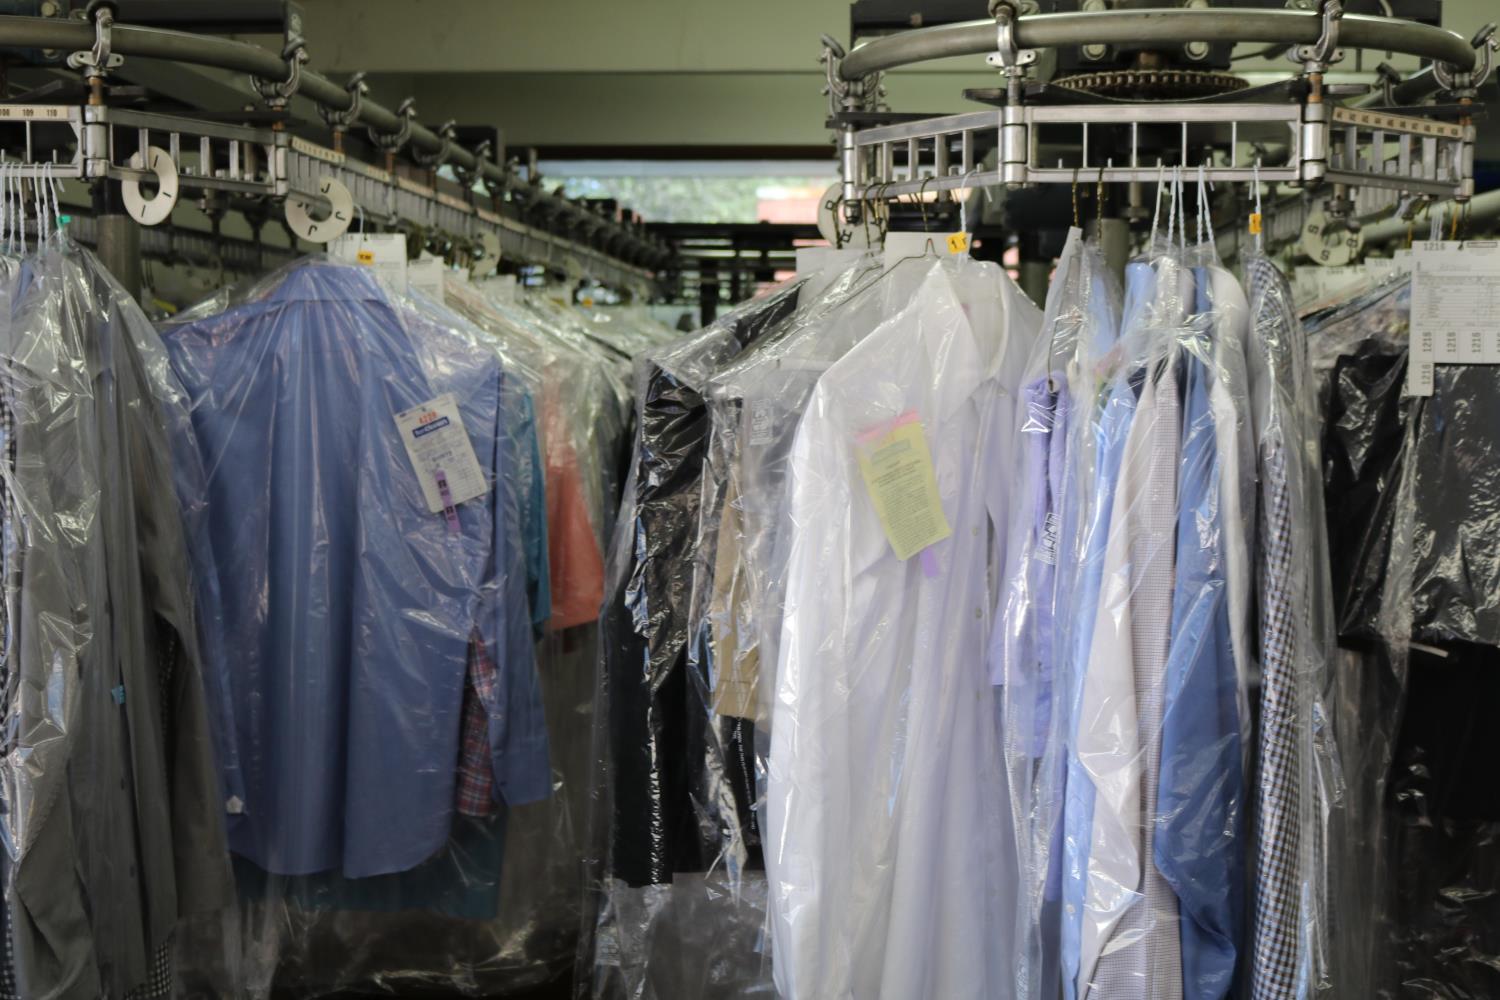 Several hanging blue, white, and neutral colored dress shirts are individually wrapped in plastic wrap at a dry cleaning business